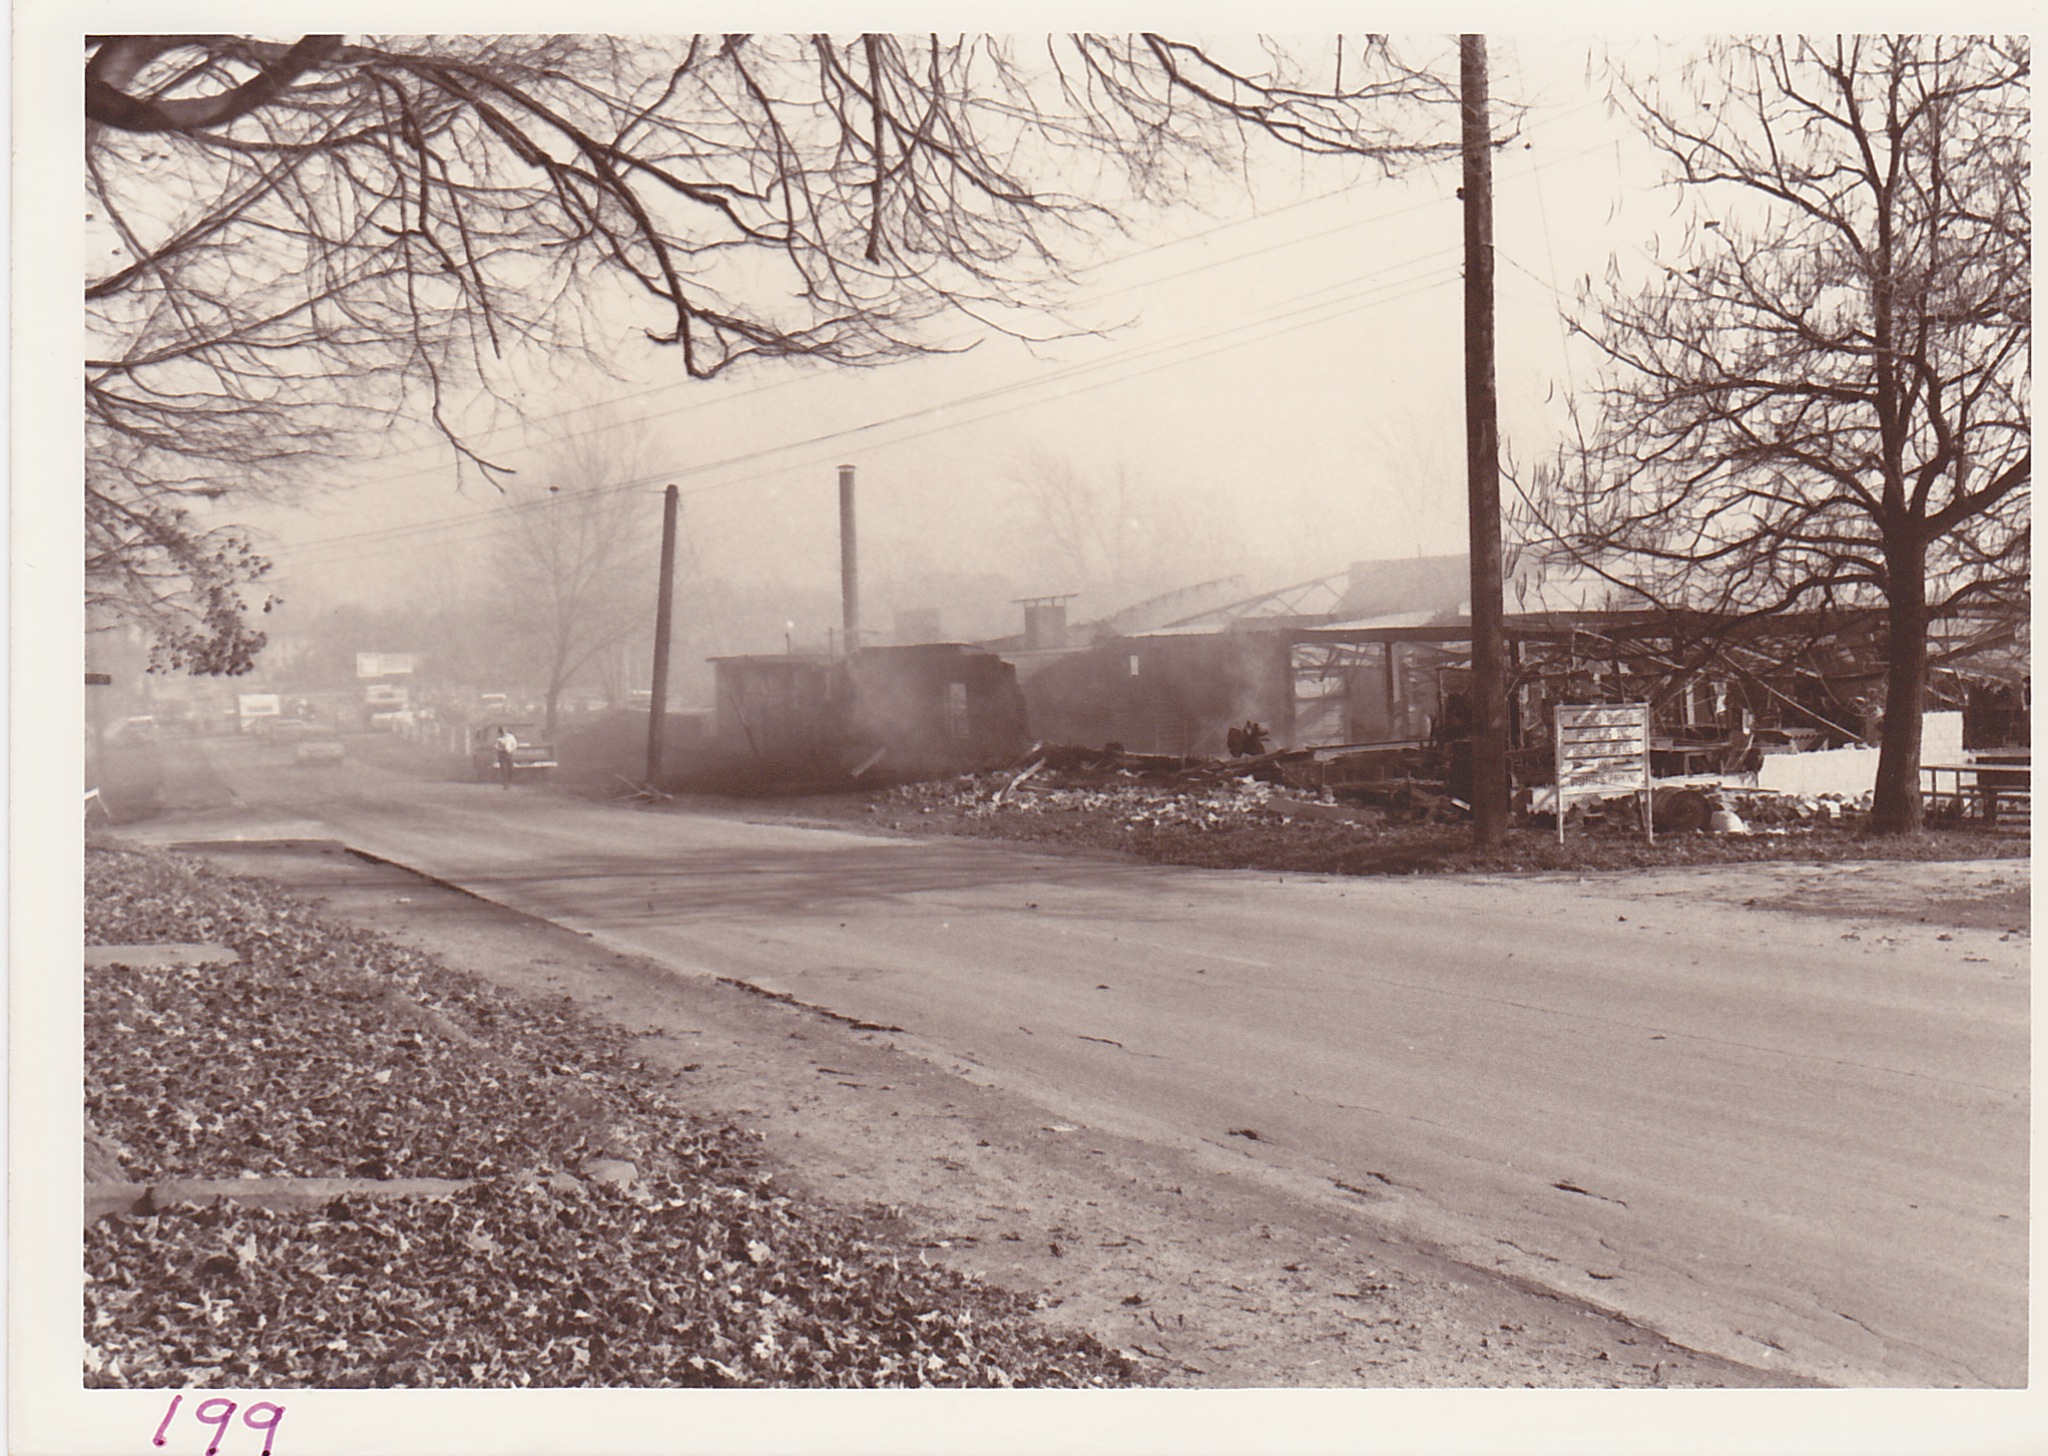 Morenci Rubber Products burning during catastrophic fire on Nov. 8, 1975.